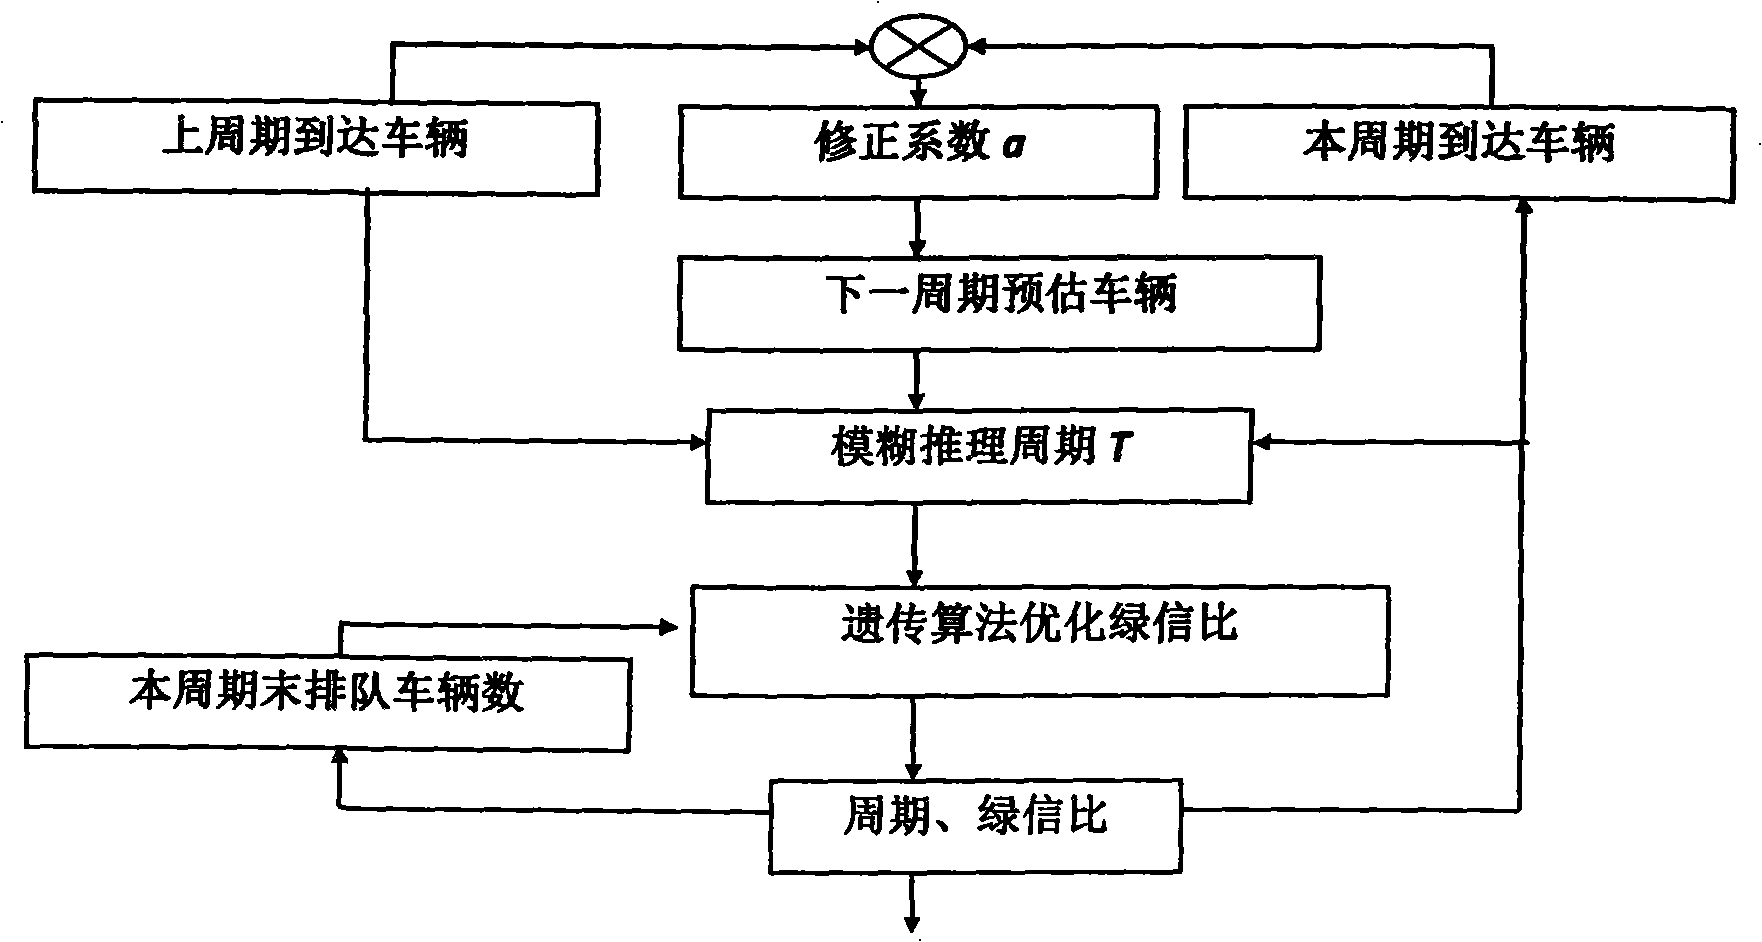 Traffic optimization control method based on intersection group